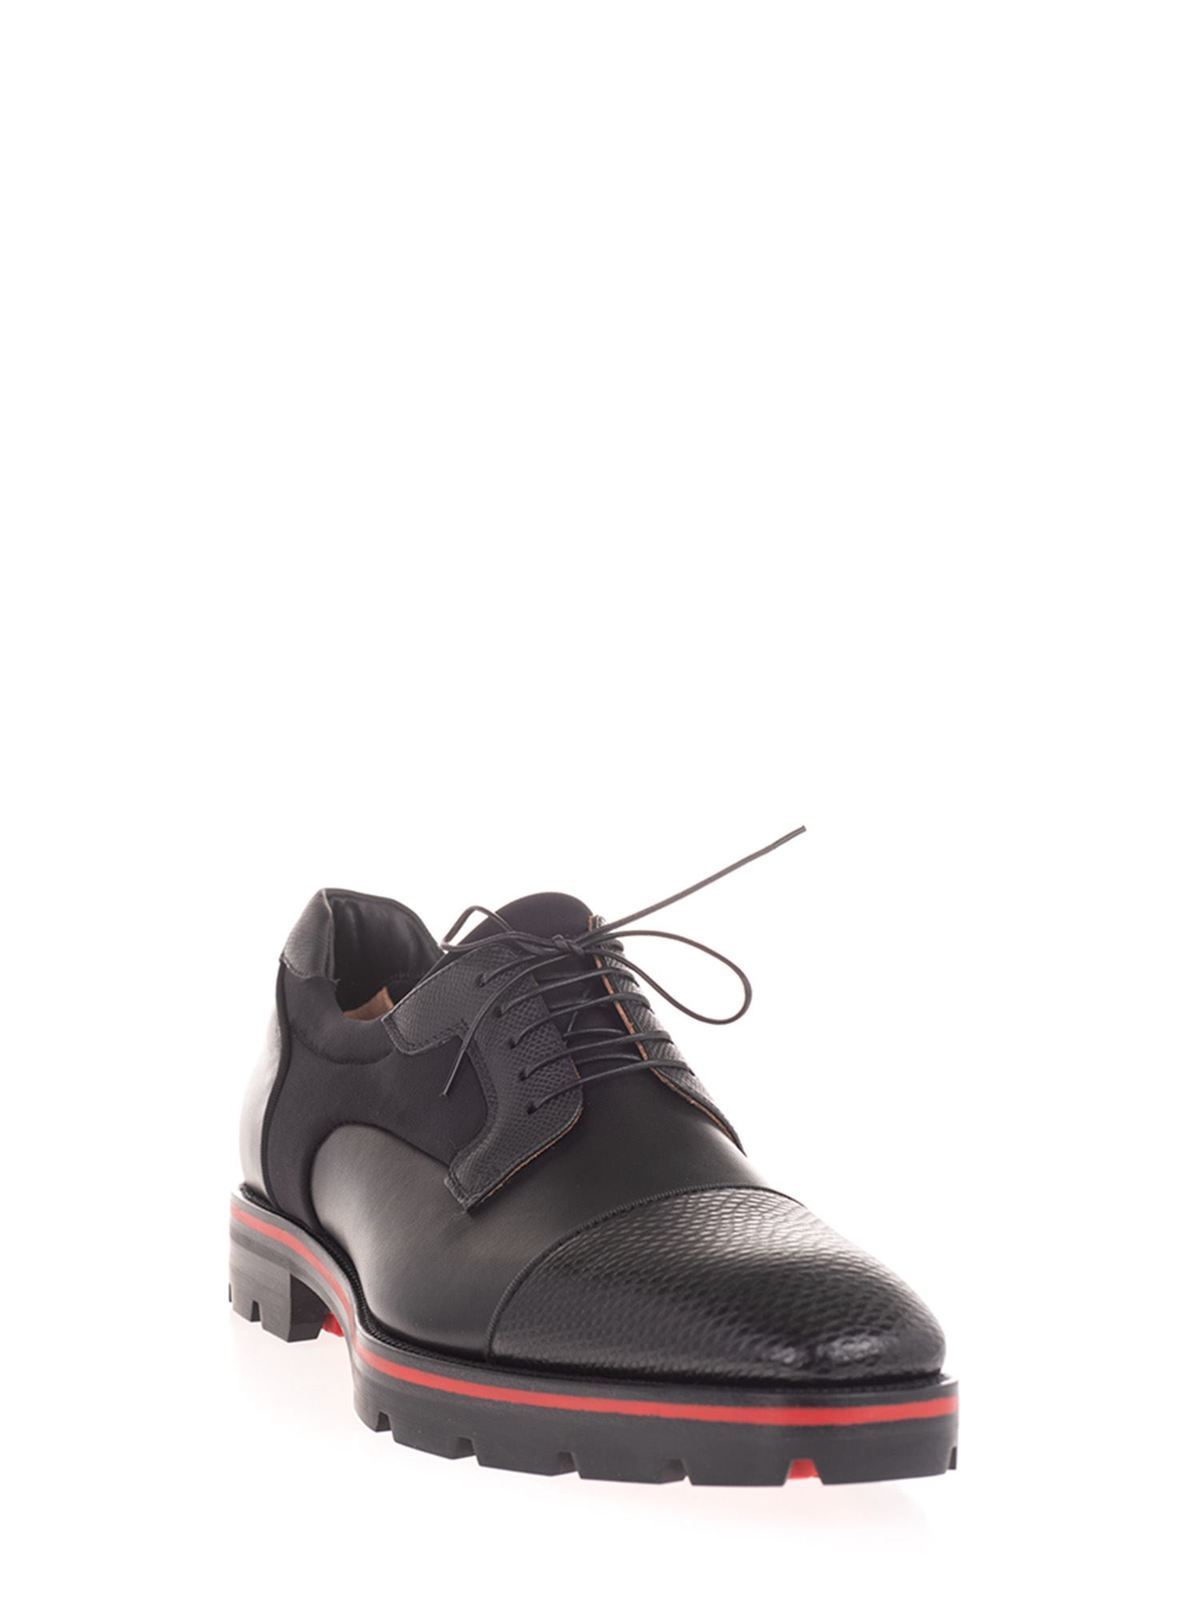 Lace-ups Christian Louboutin Derby shoes in black -